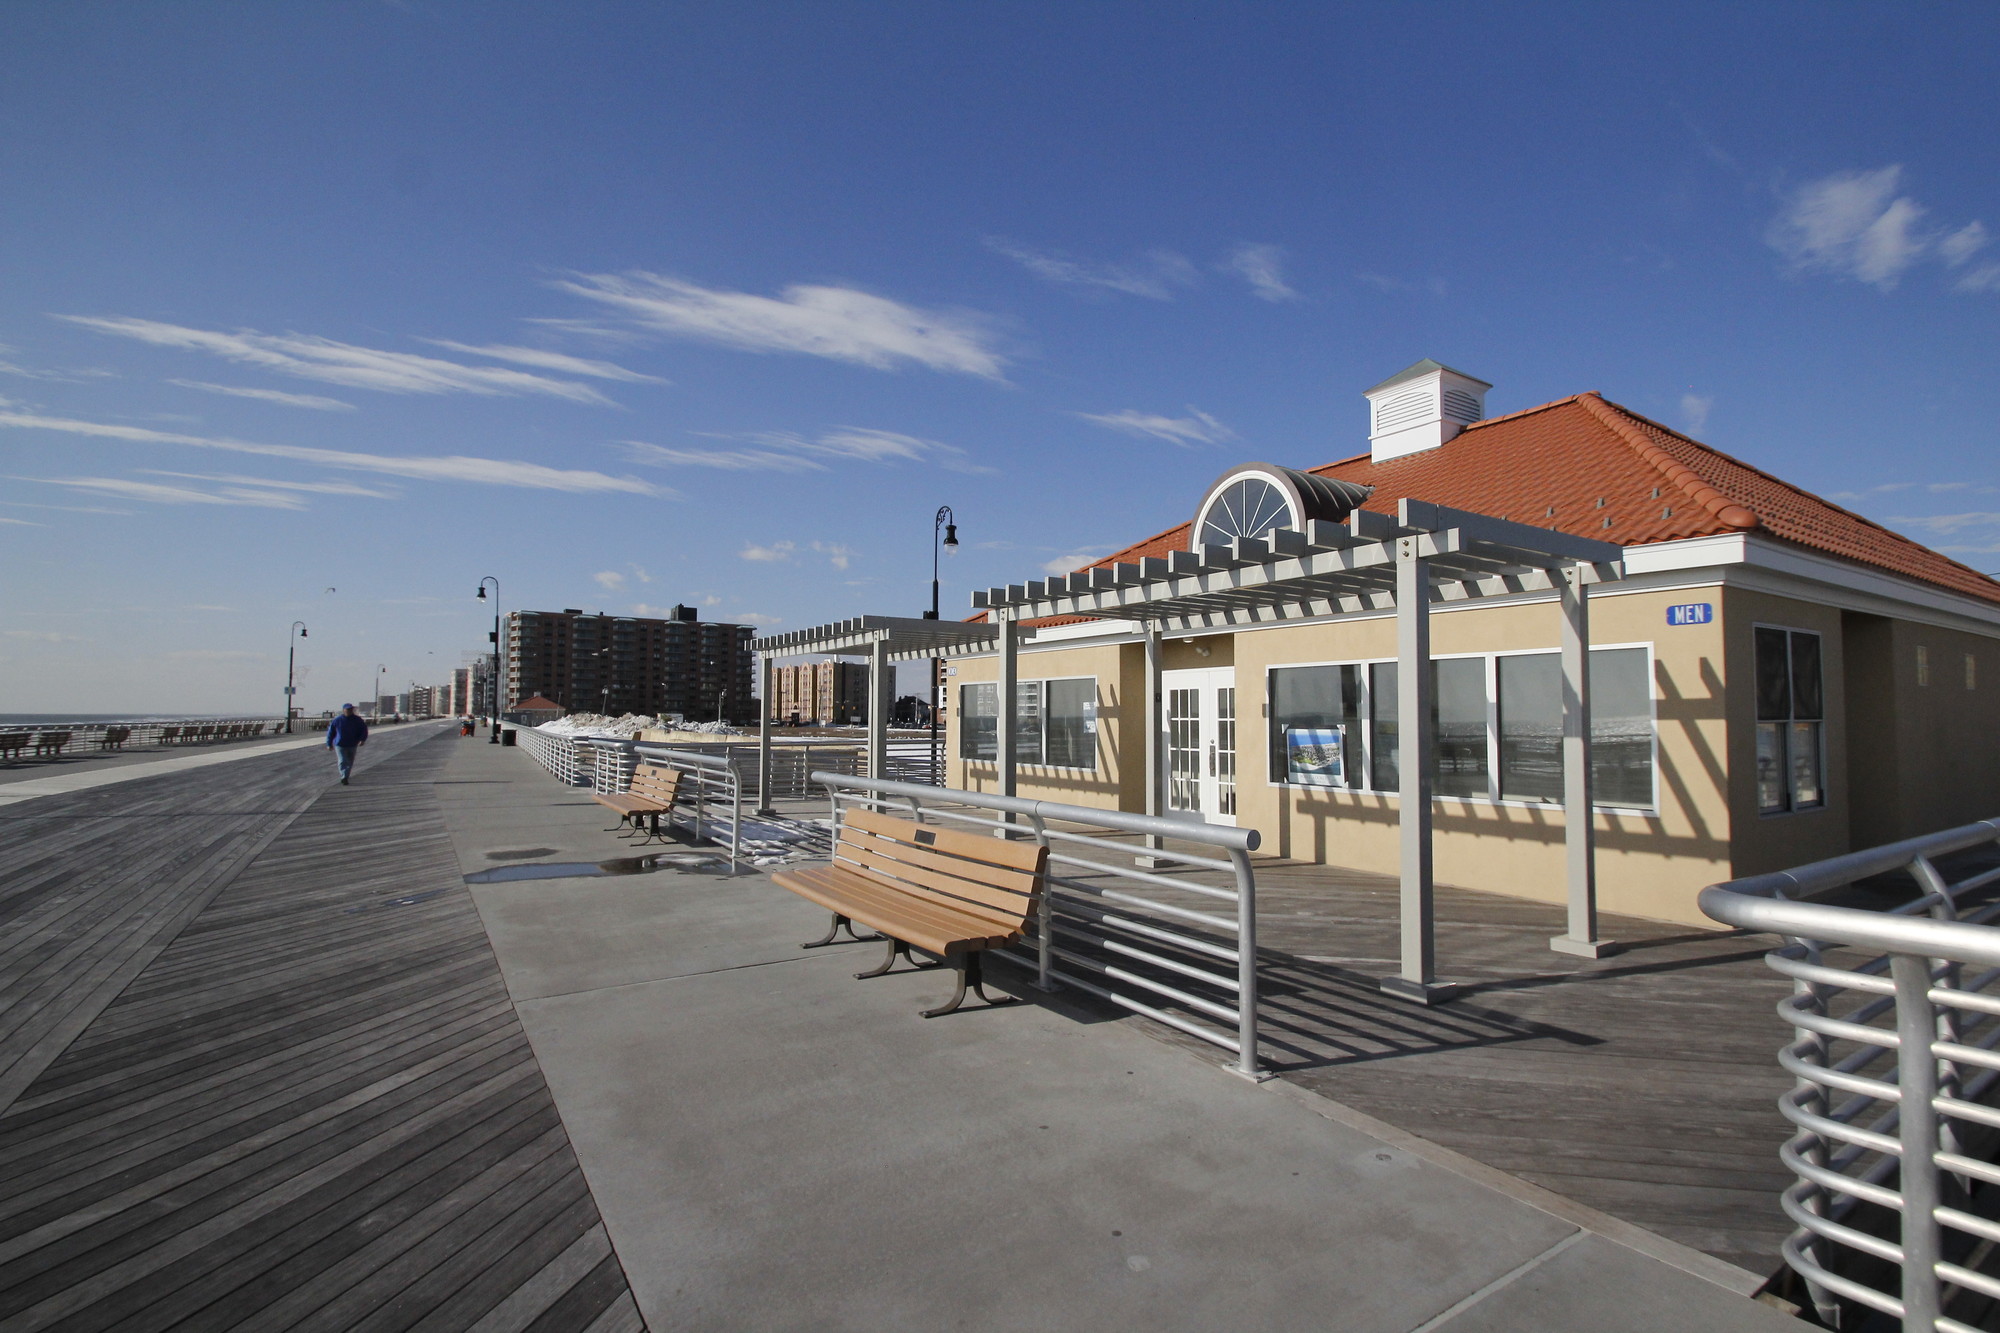 The city has issued a request for proposals to add concessions at the new comfort stations along the boardwalk, like this one at Riverside Boulevard. Photo by Christina Daly/Herald